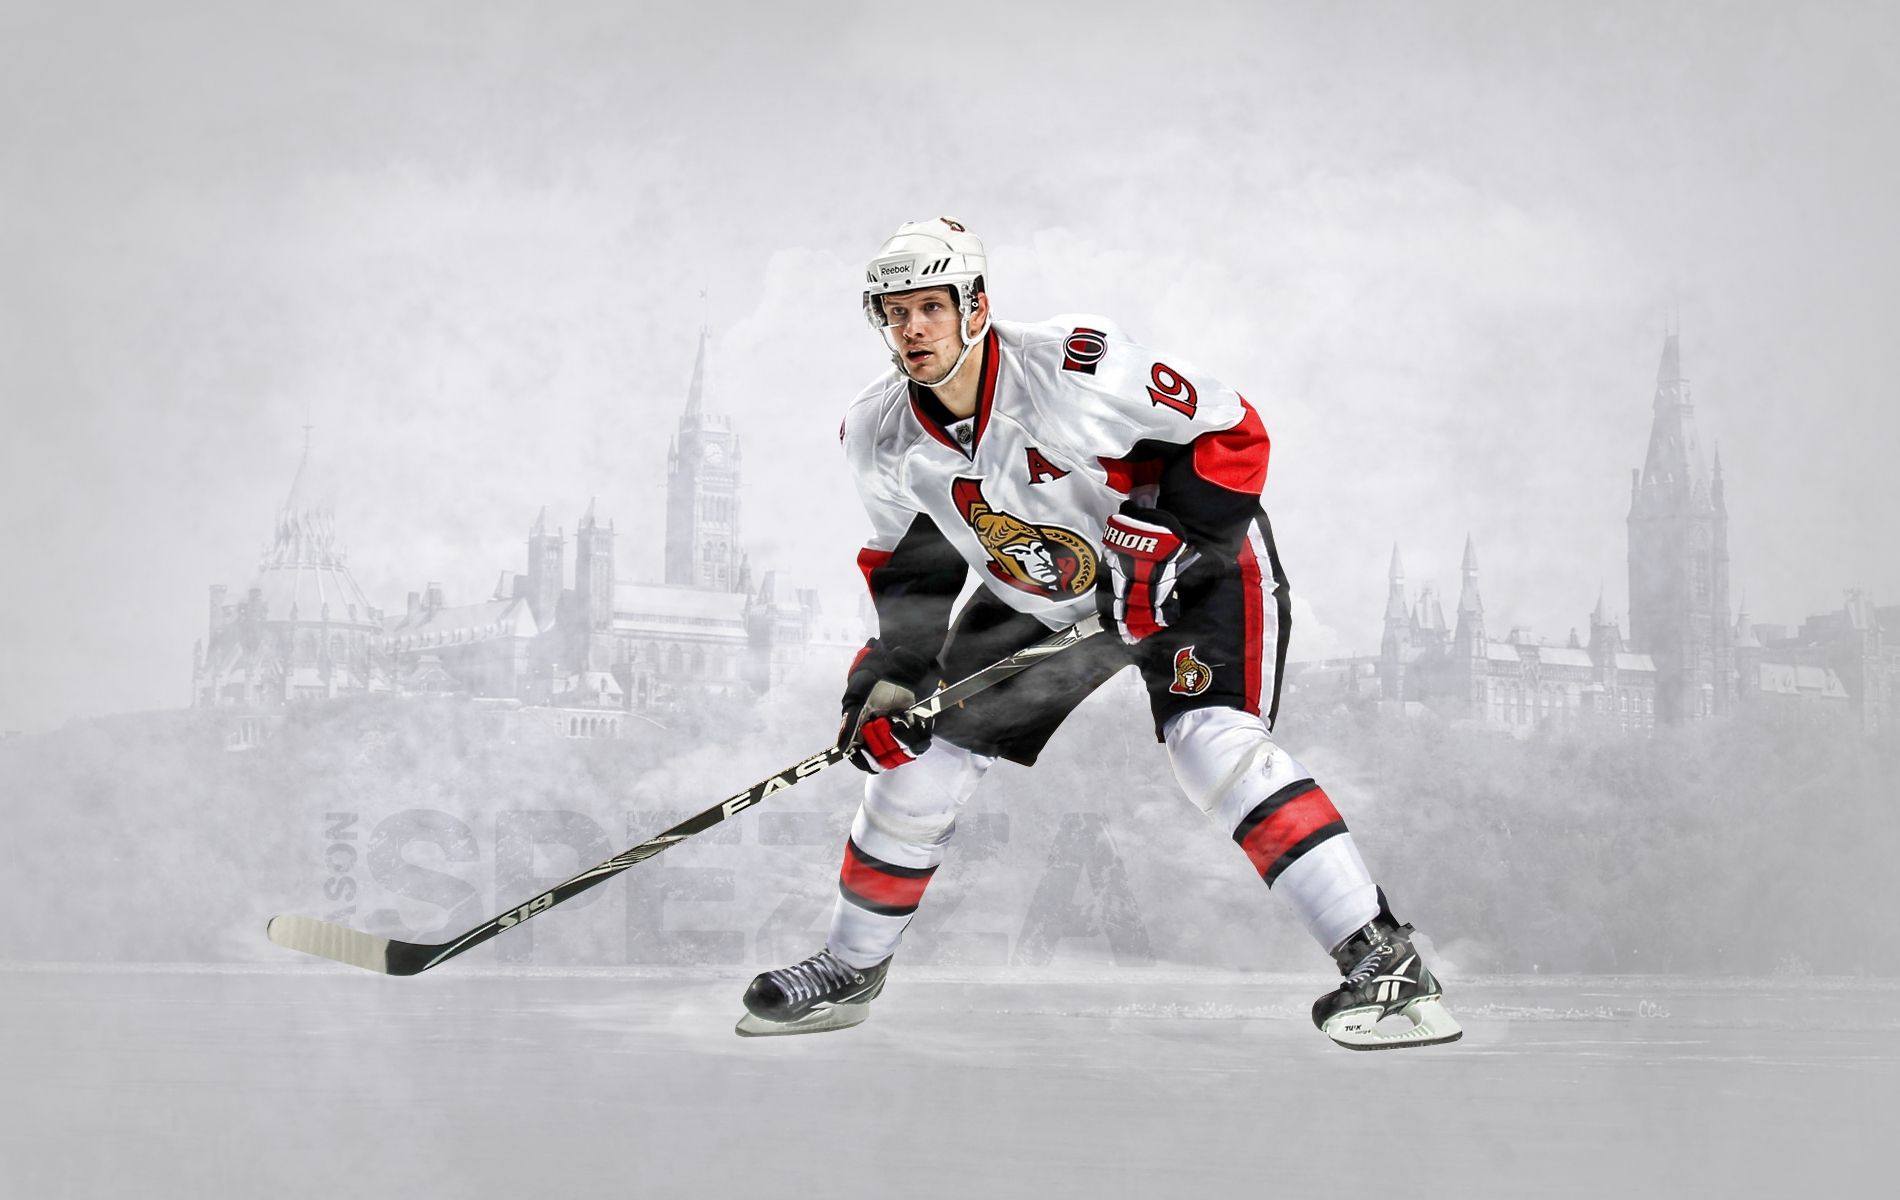 Free download Famous NHL player Jason Spezza wallpaper and image